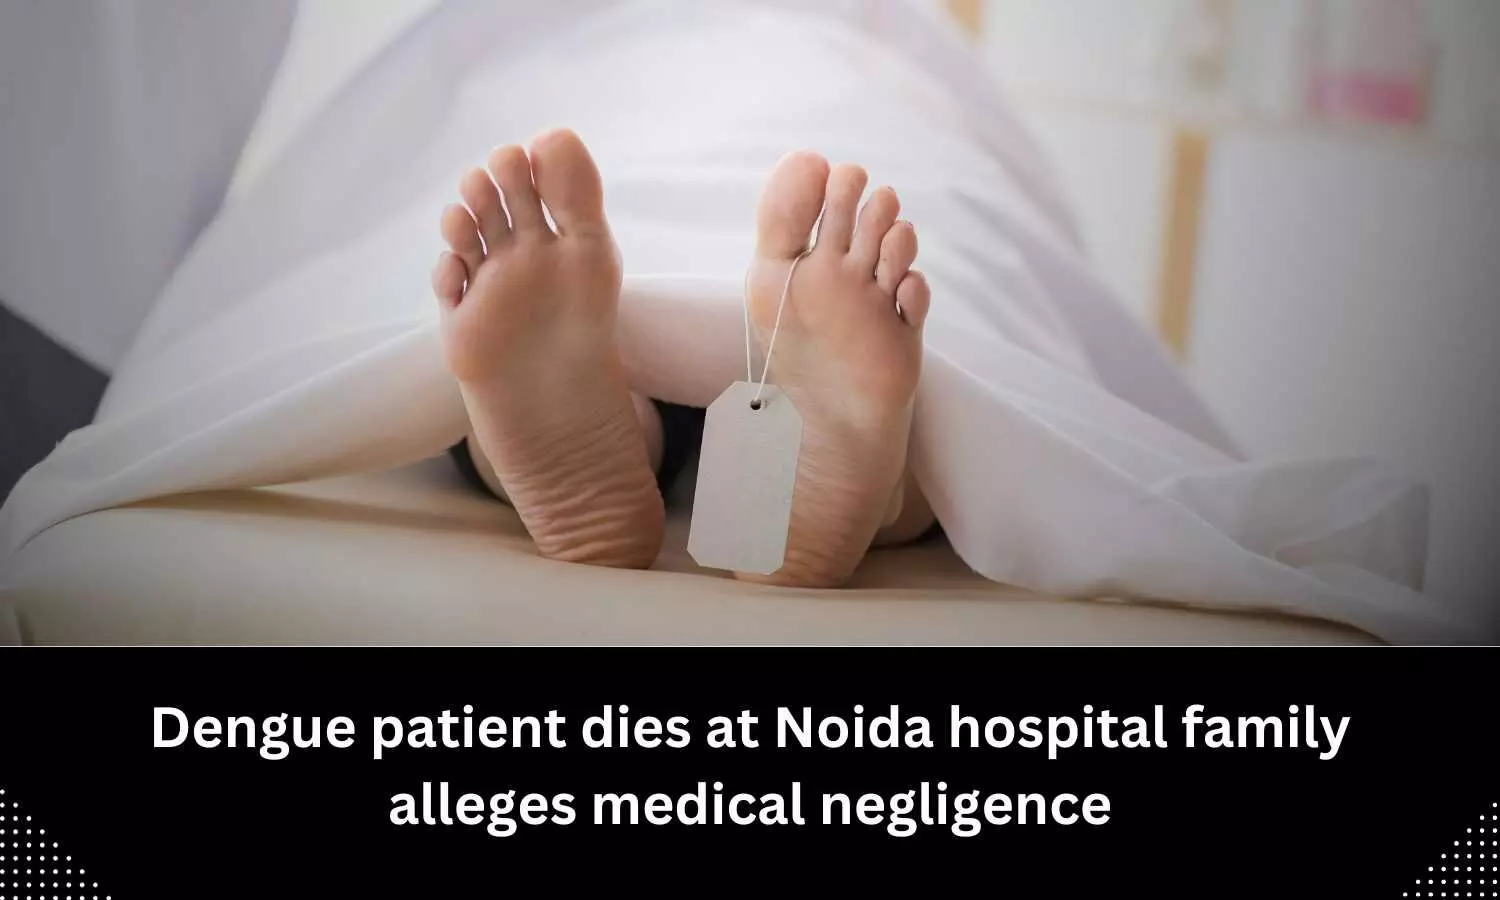 Death of dengue patient at Greater Noida hospital, family alleges medical negligence